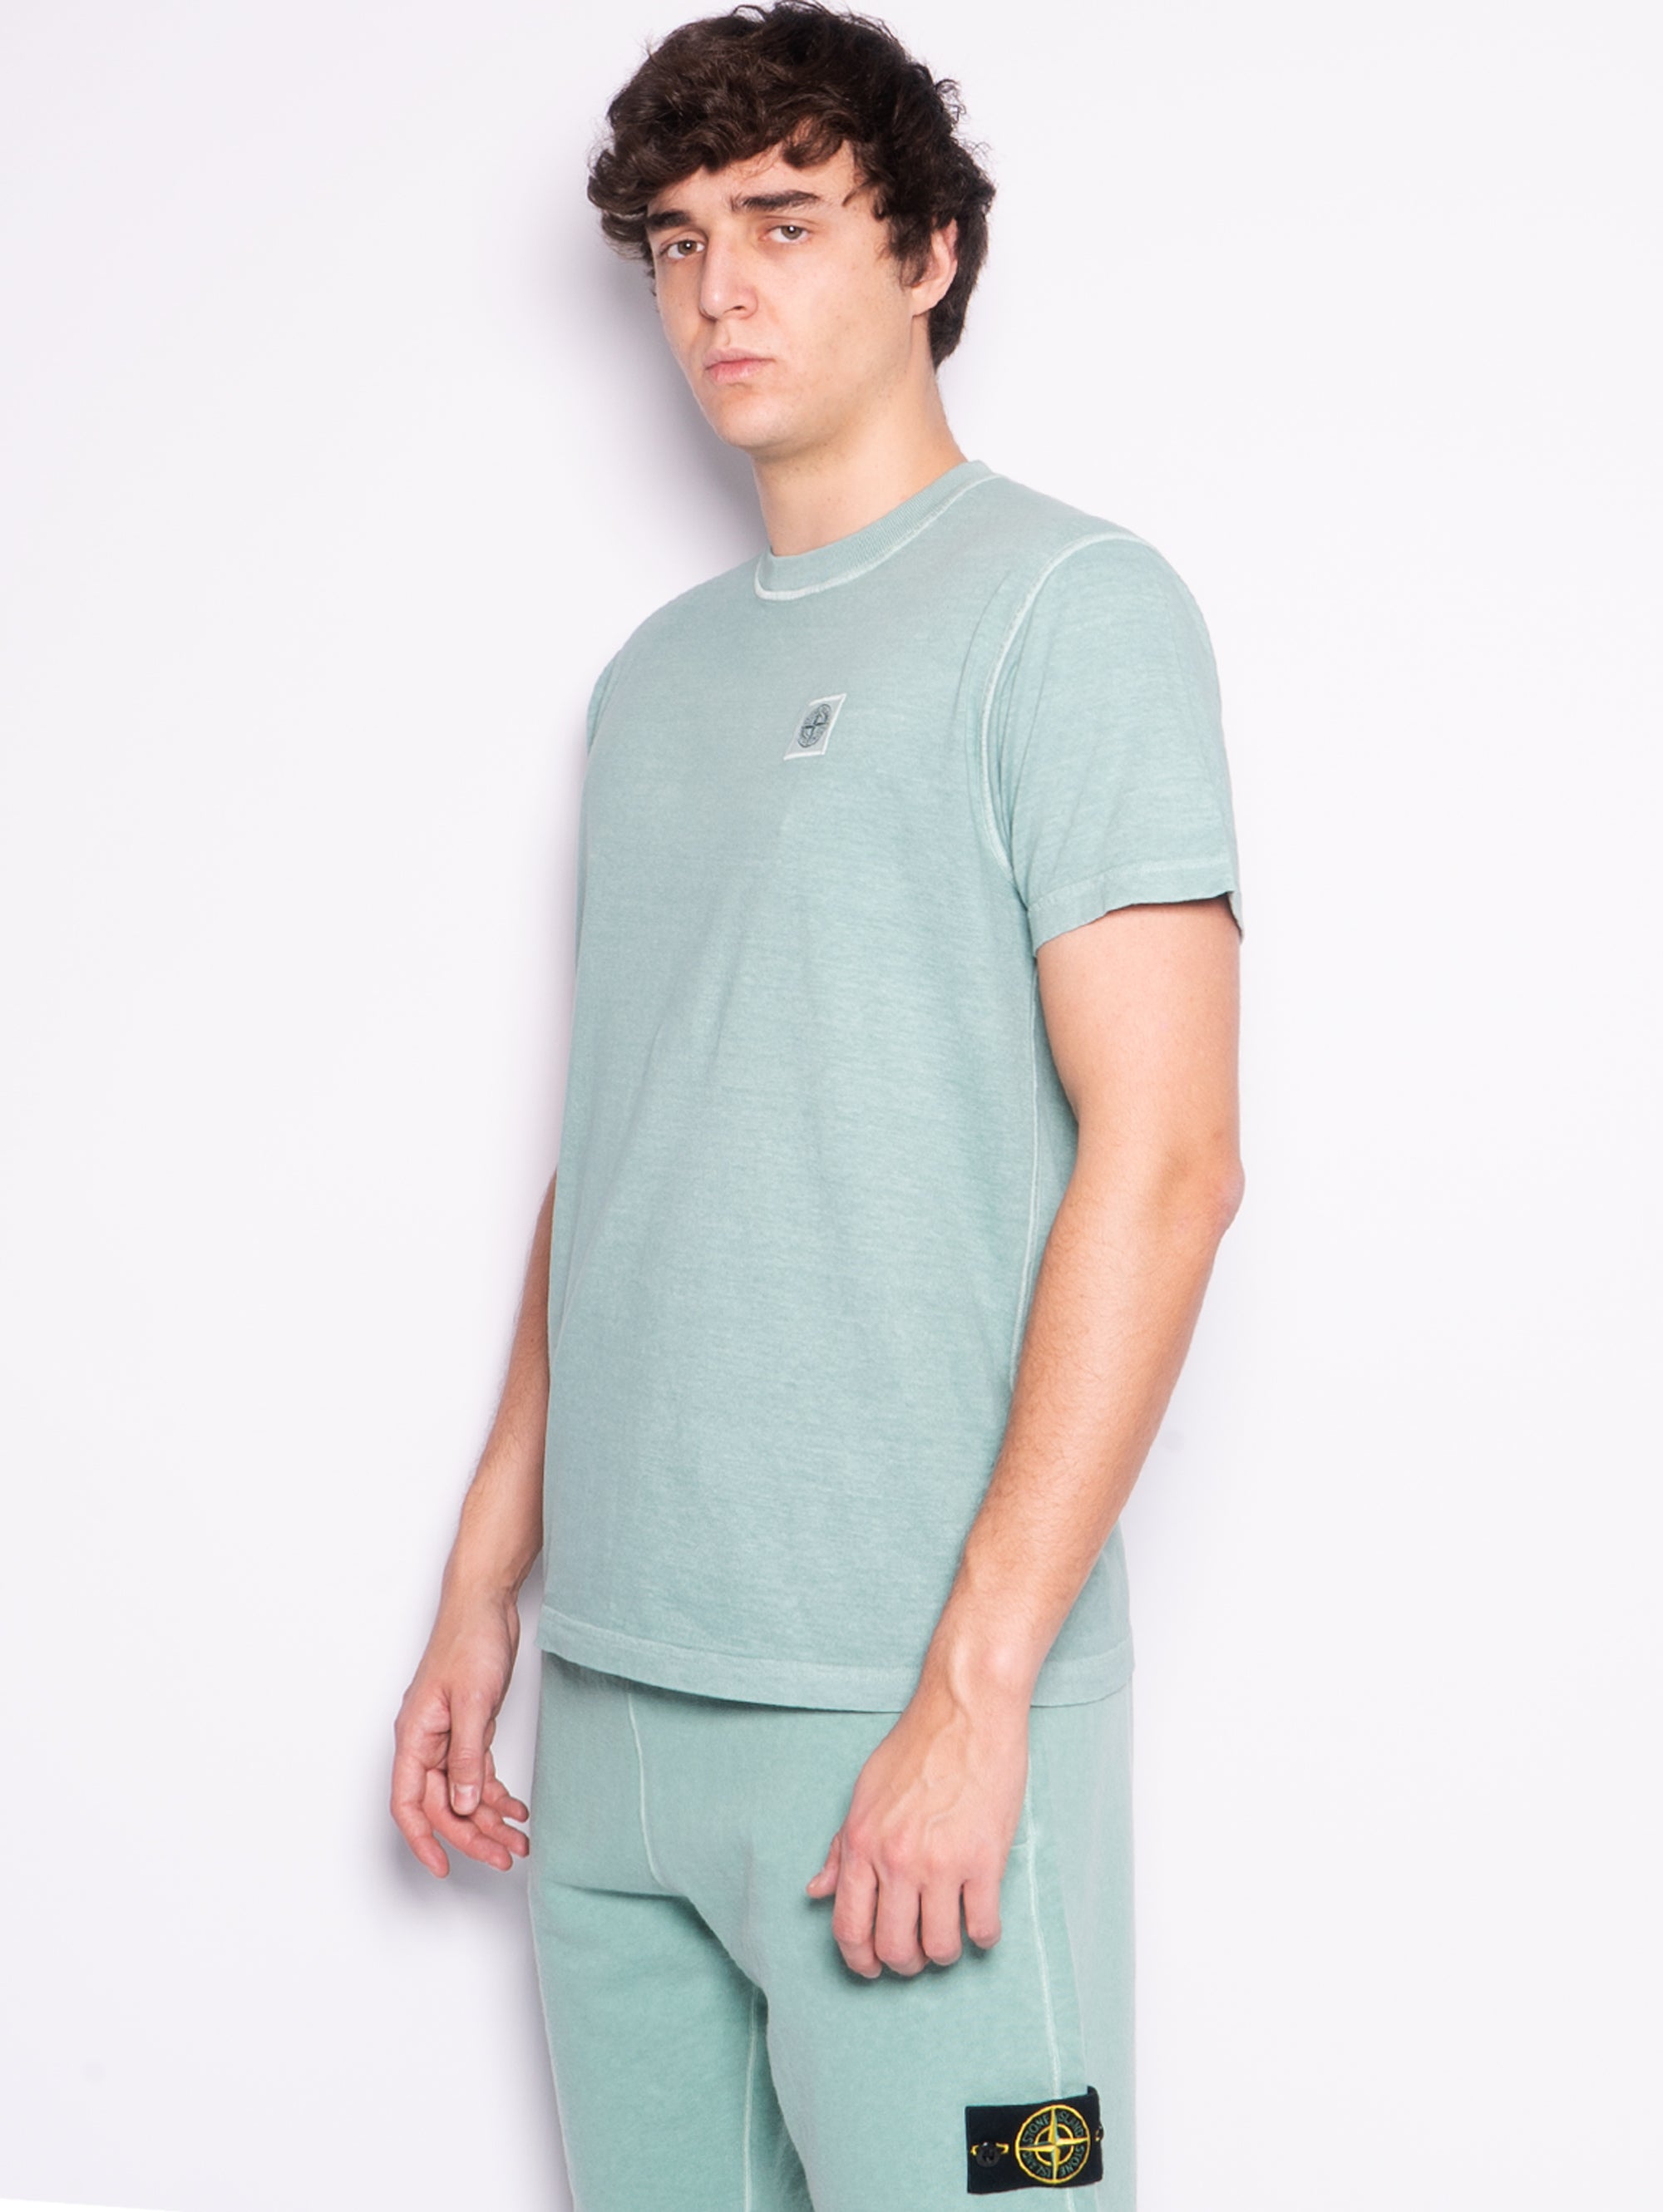 Garment-dyed T-shirt with green fixed effect